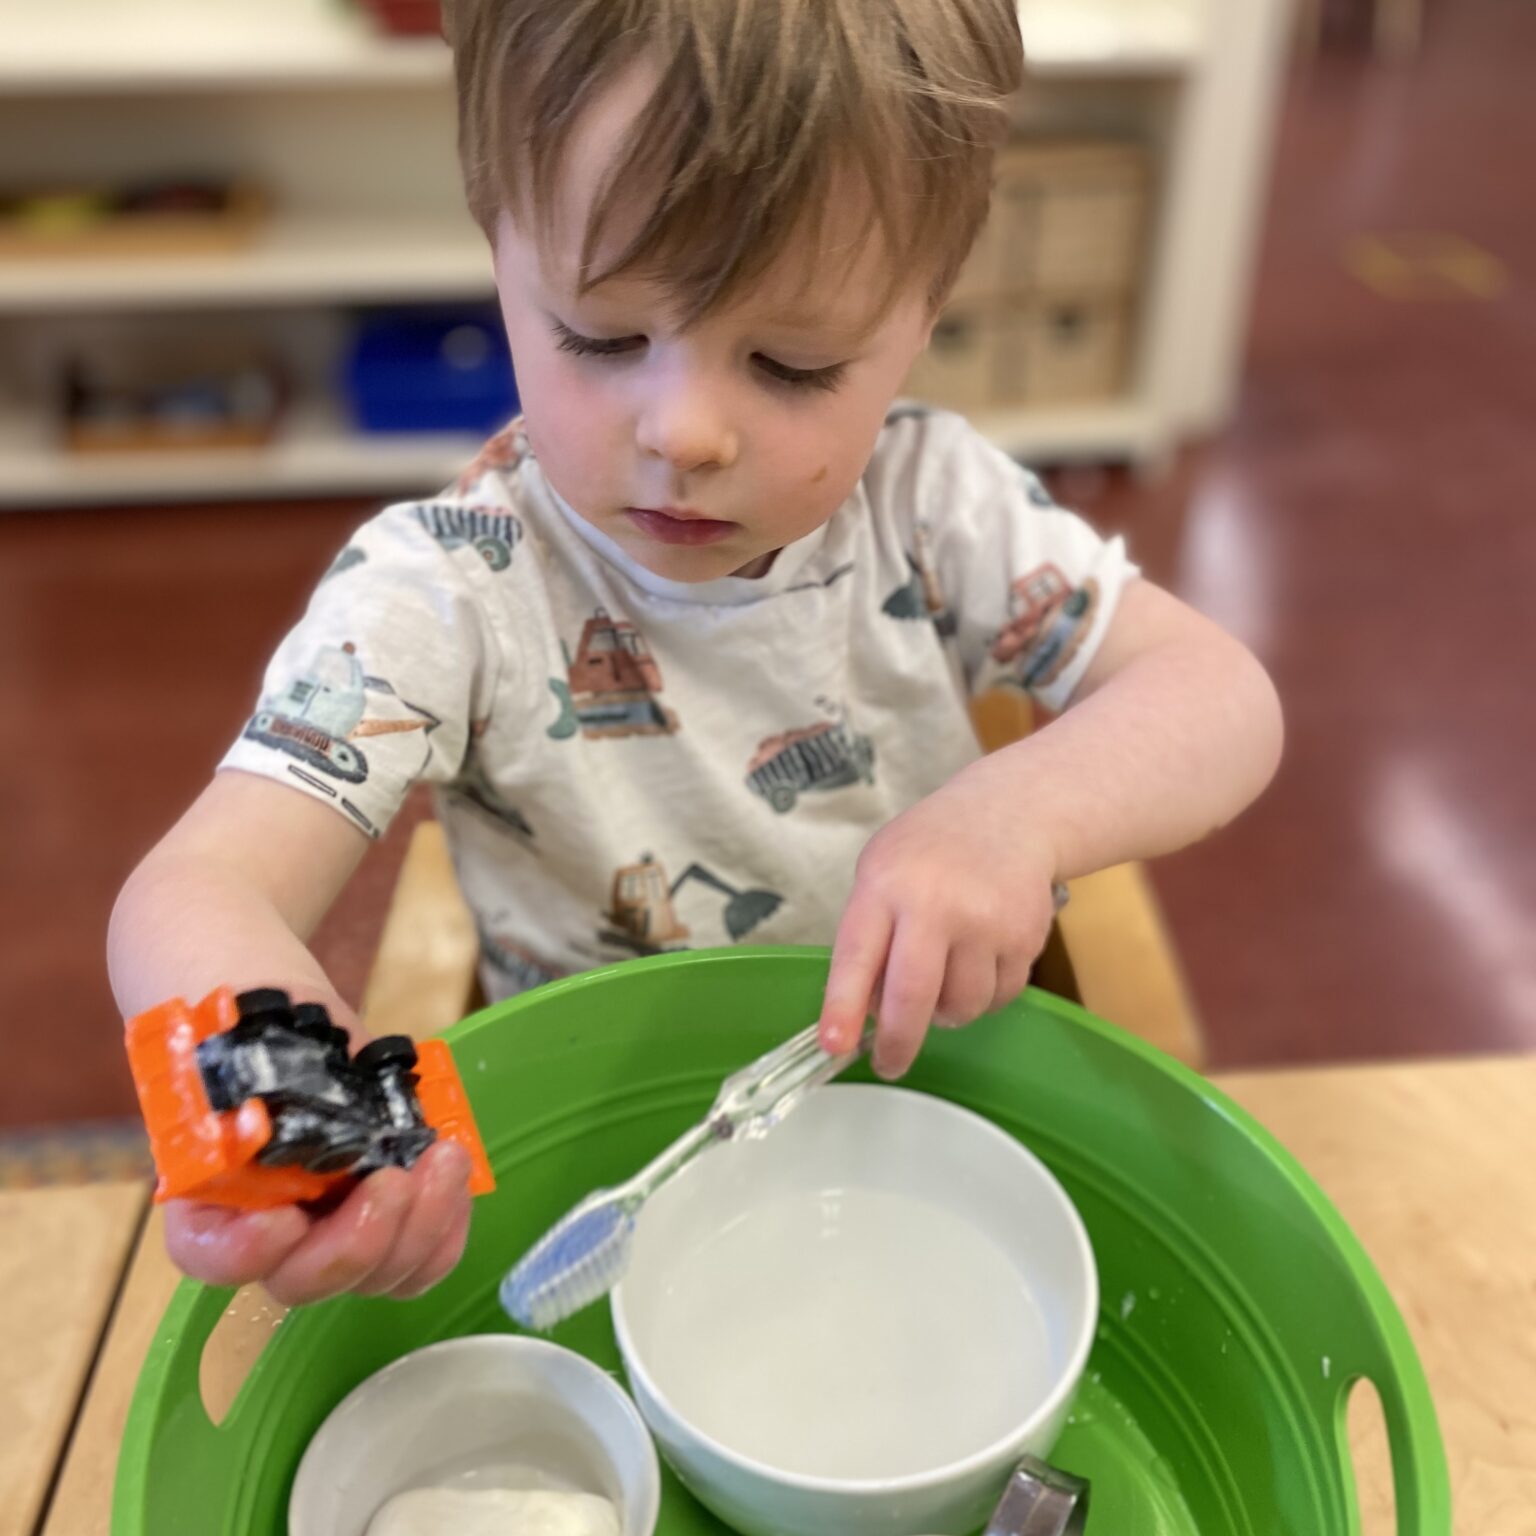 Toddler plays with bowls in a personal play station